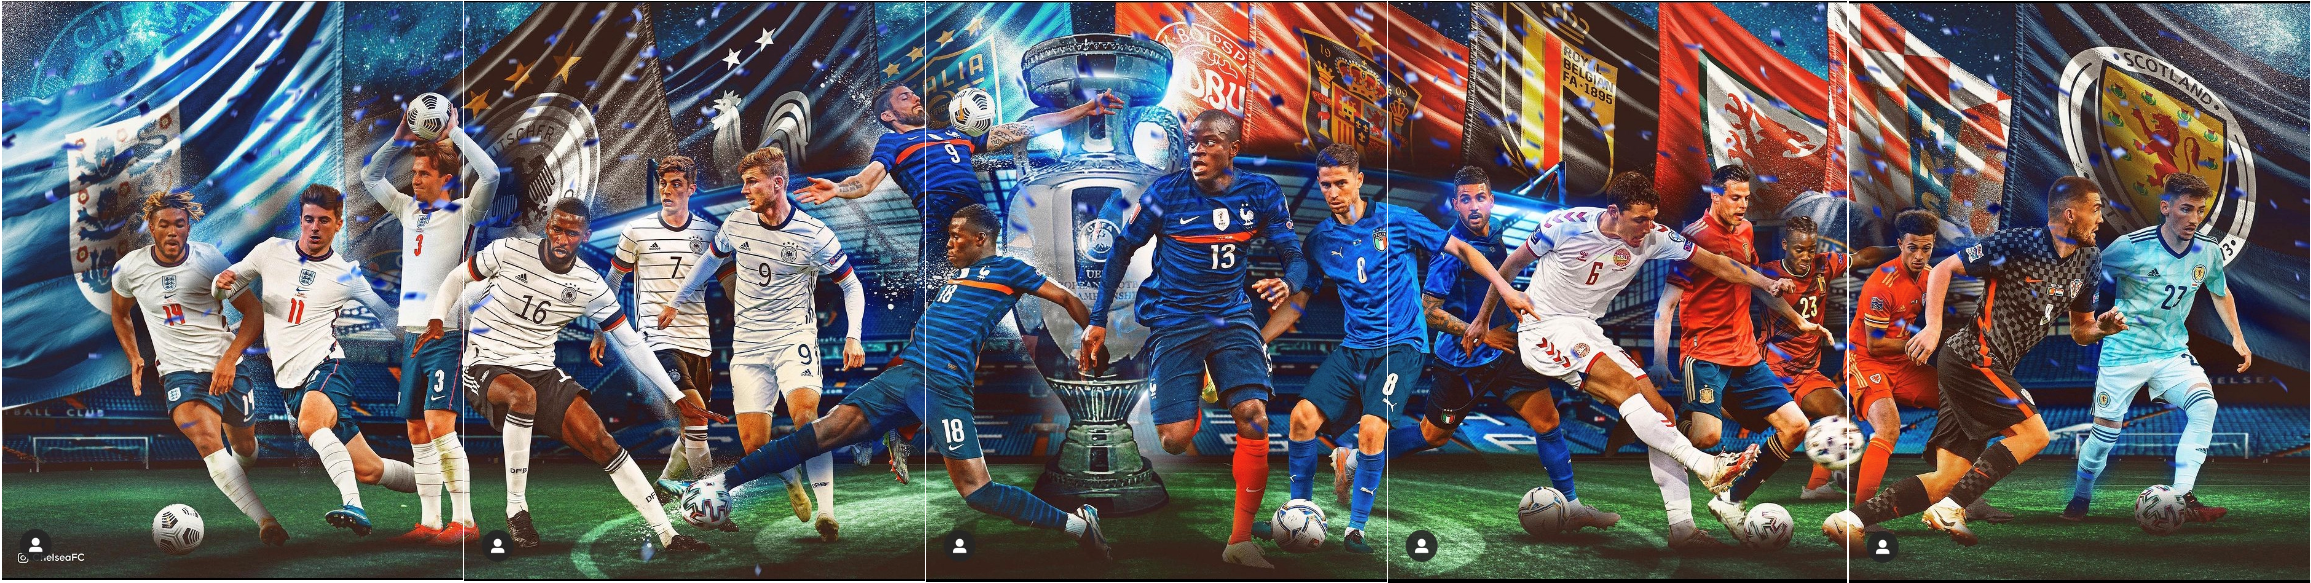 UEFA Euro 2020 with chelsea players